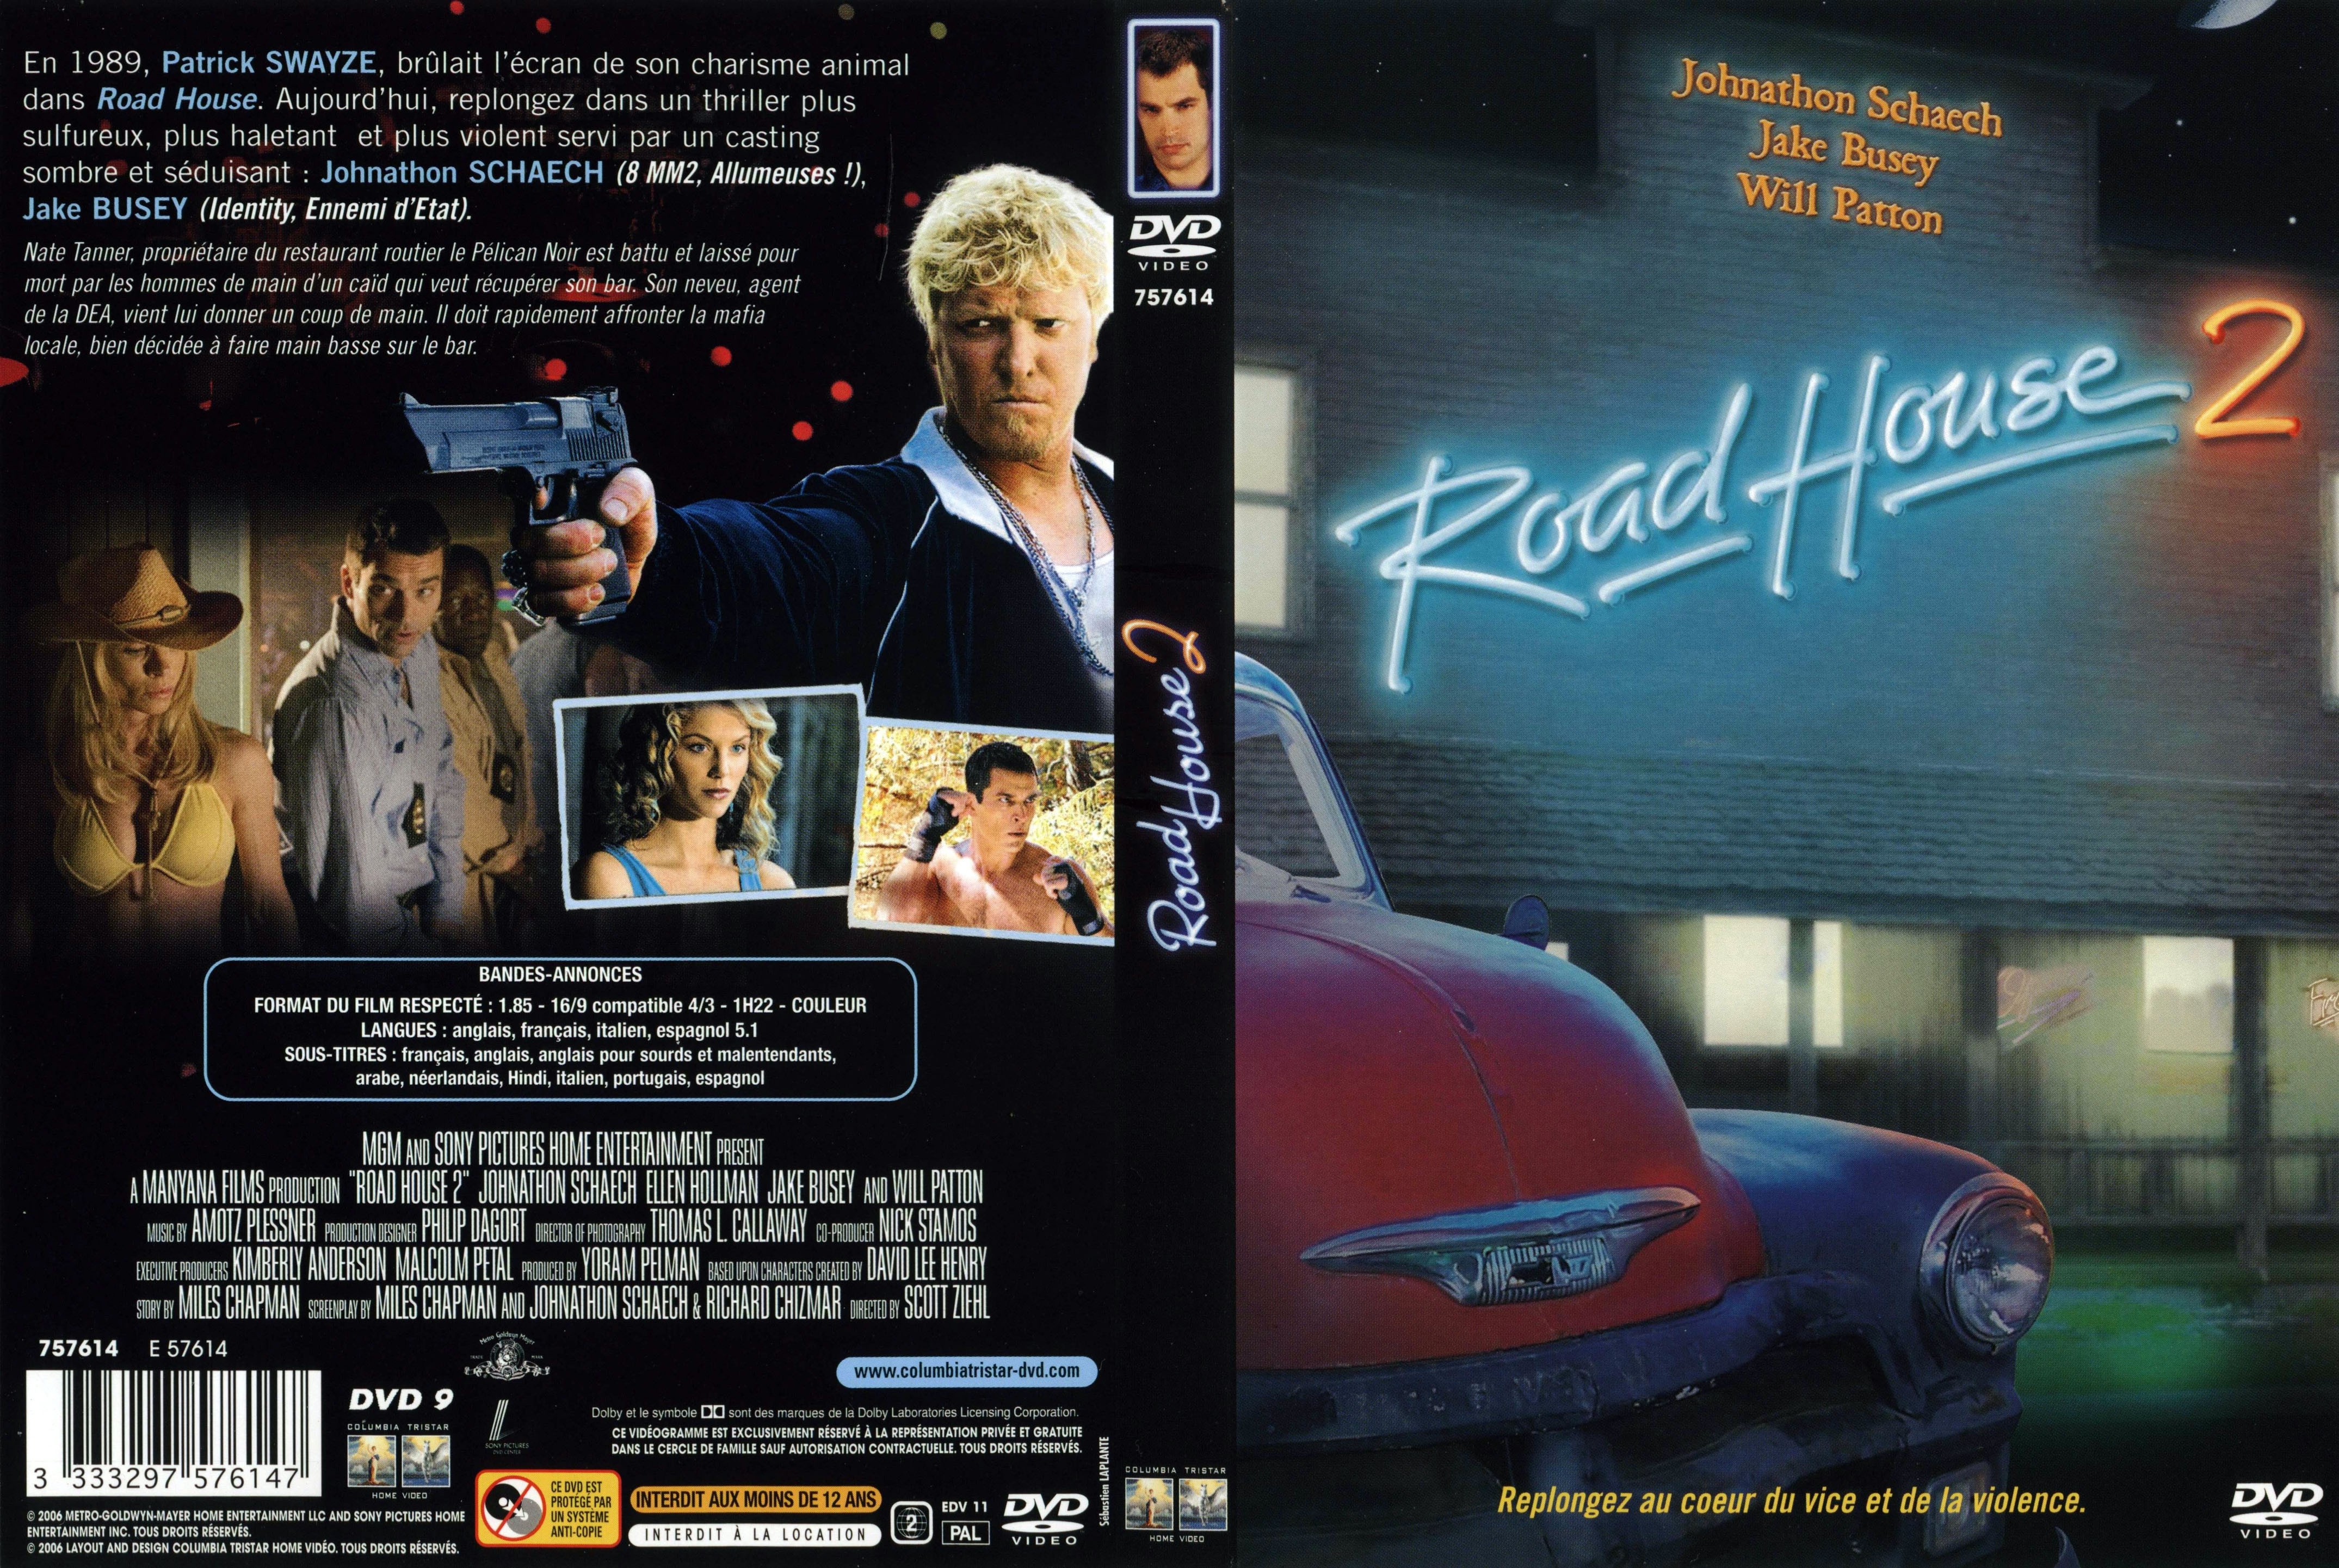 Jaquette DVD Road house 2